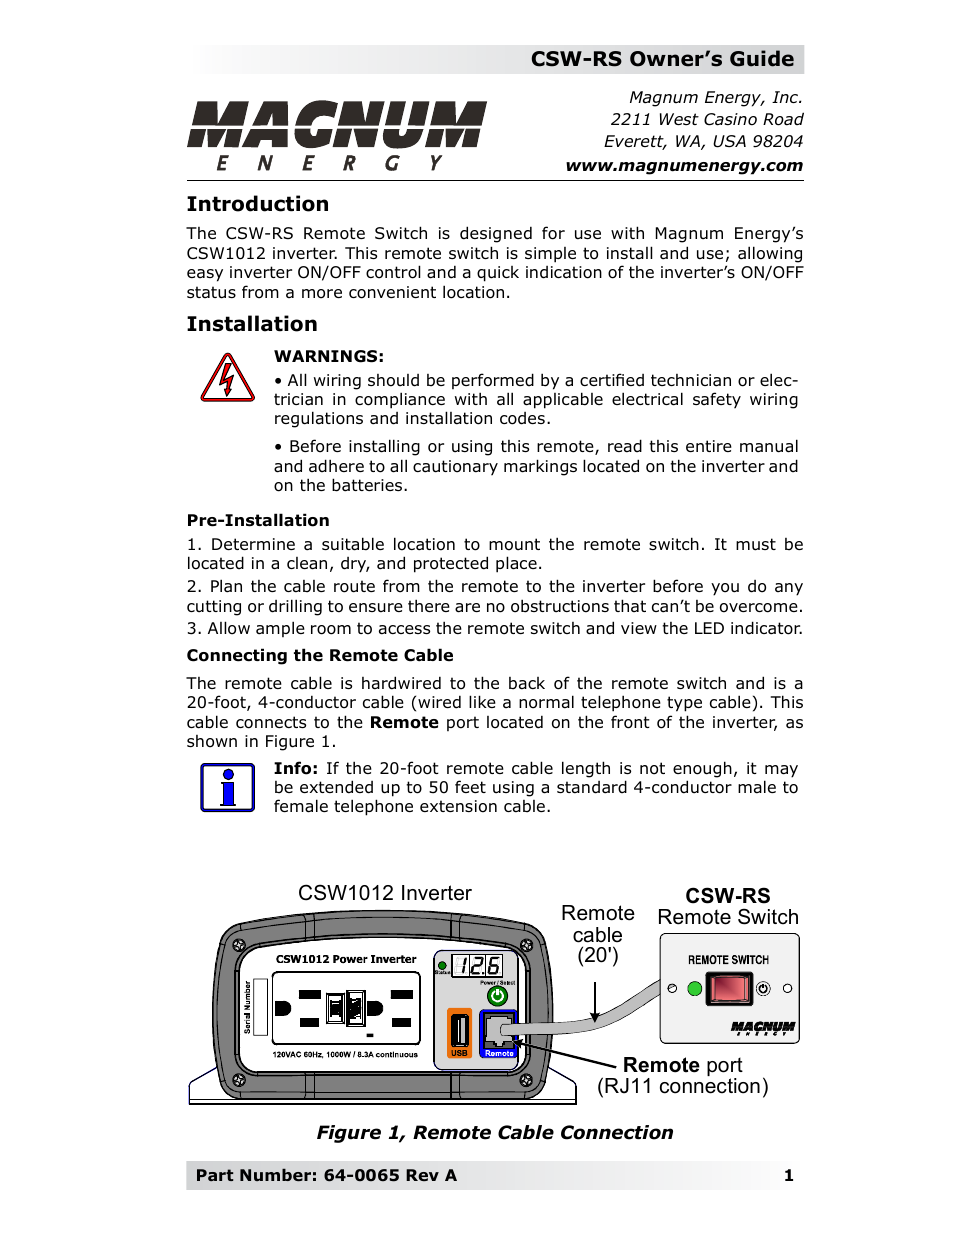 CSW Remote Switch (CSW-RS)